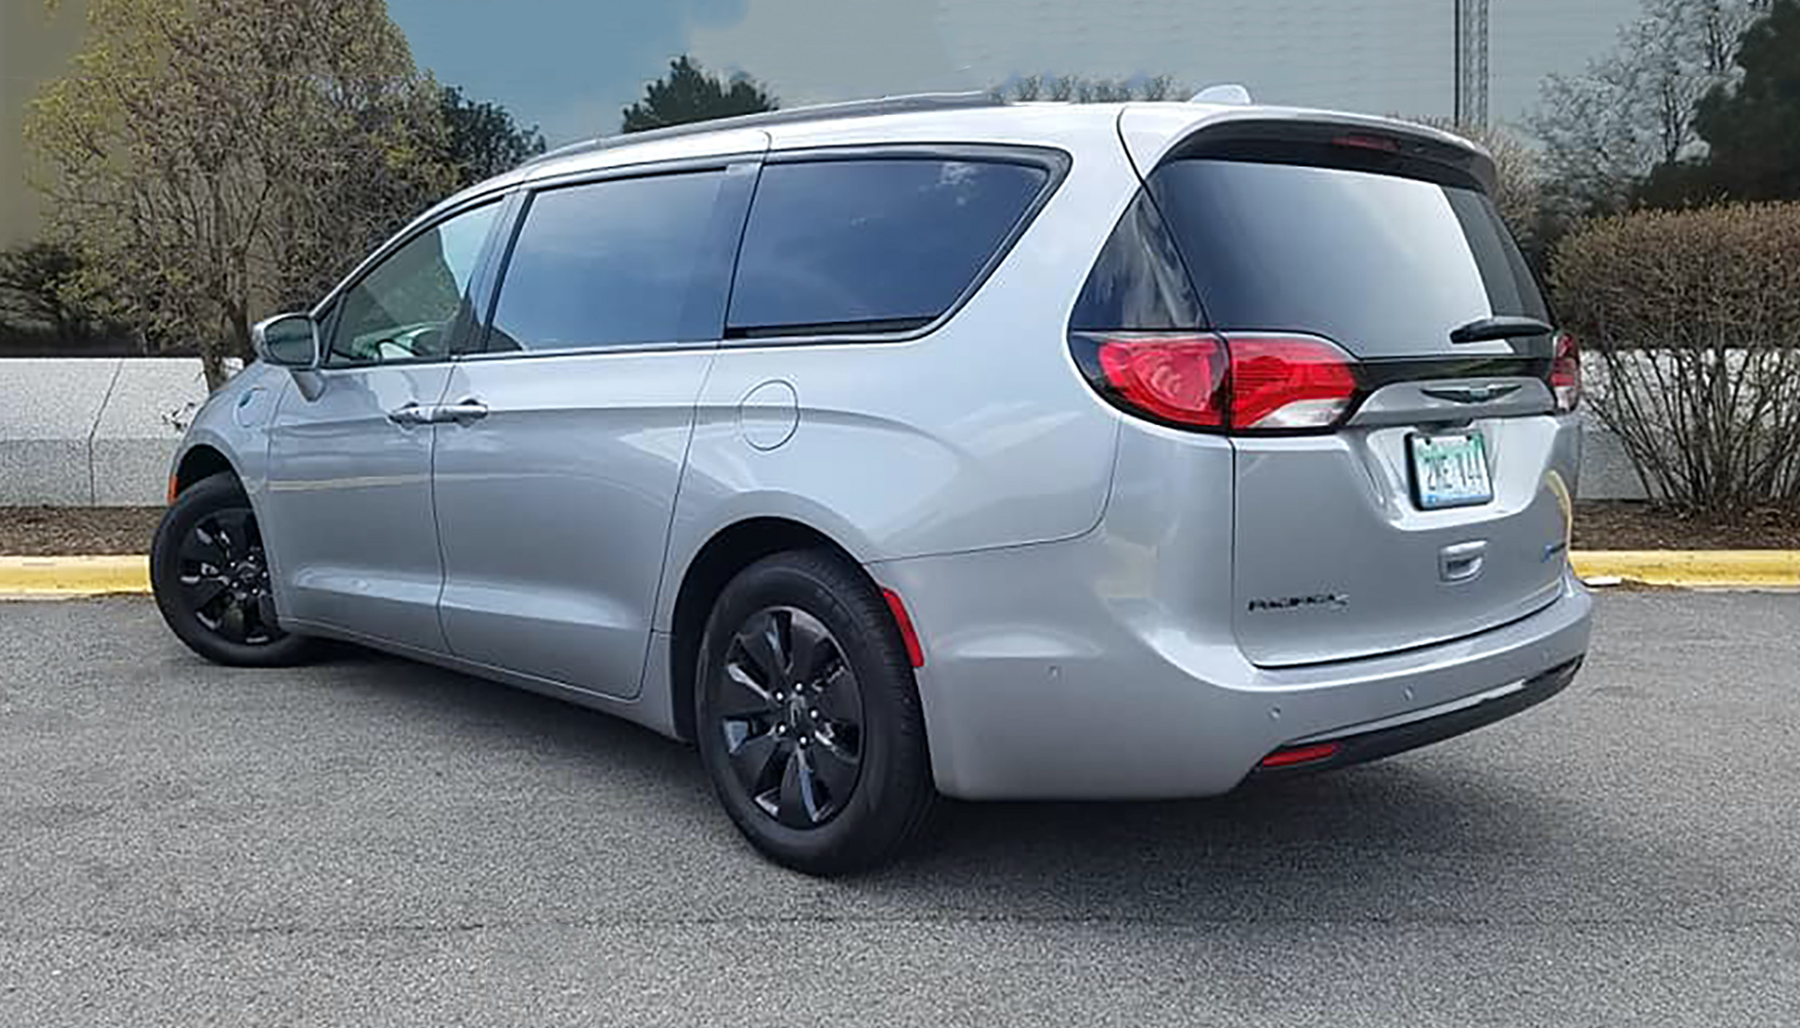 Chrysler Pacifica Hybrid 2020 Milage / 2020 Chrysler Pacifica Review